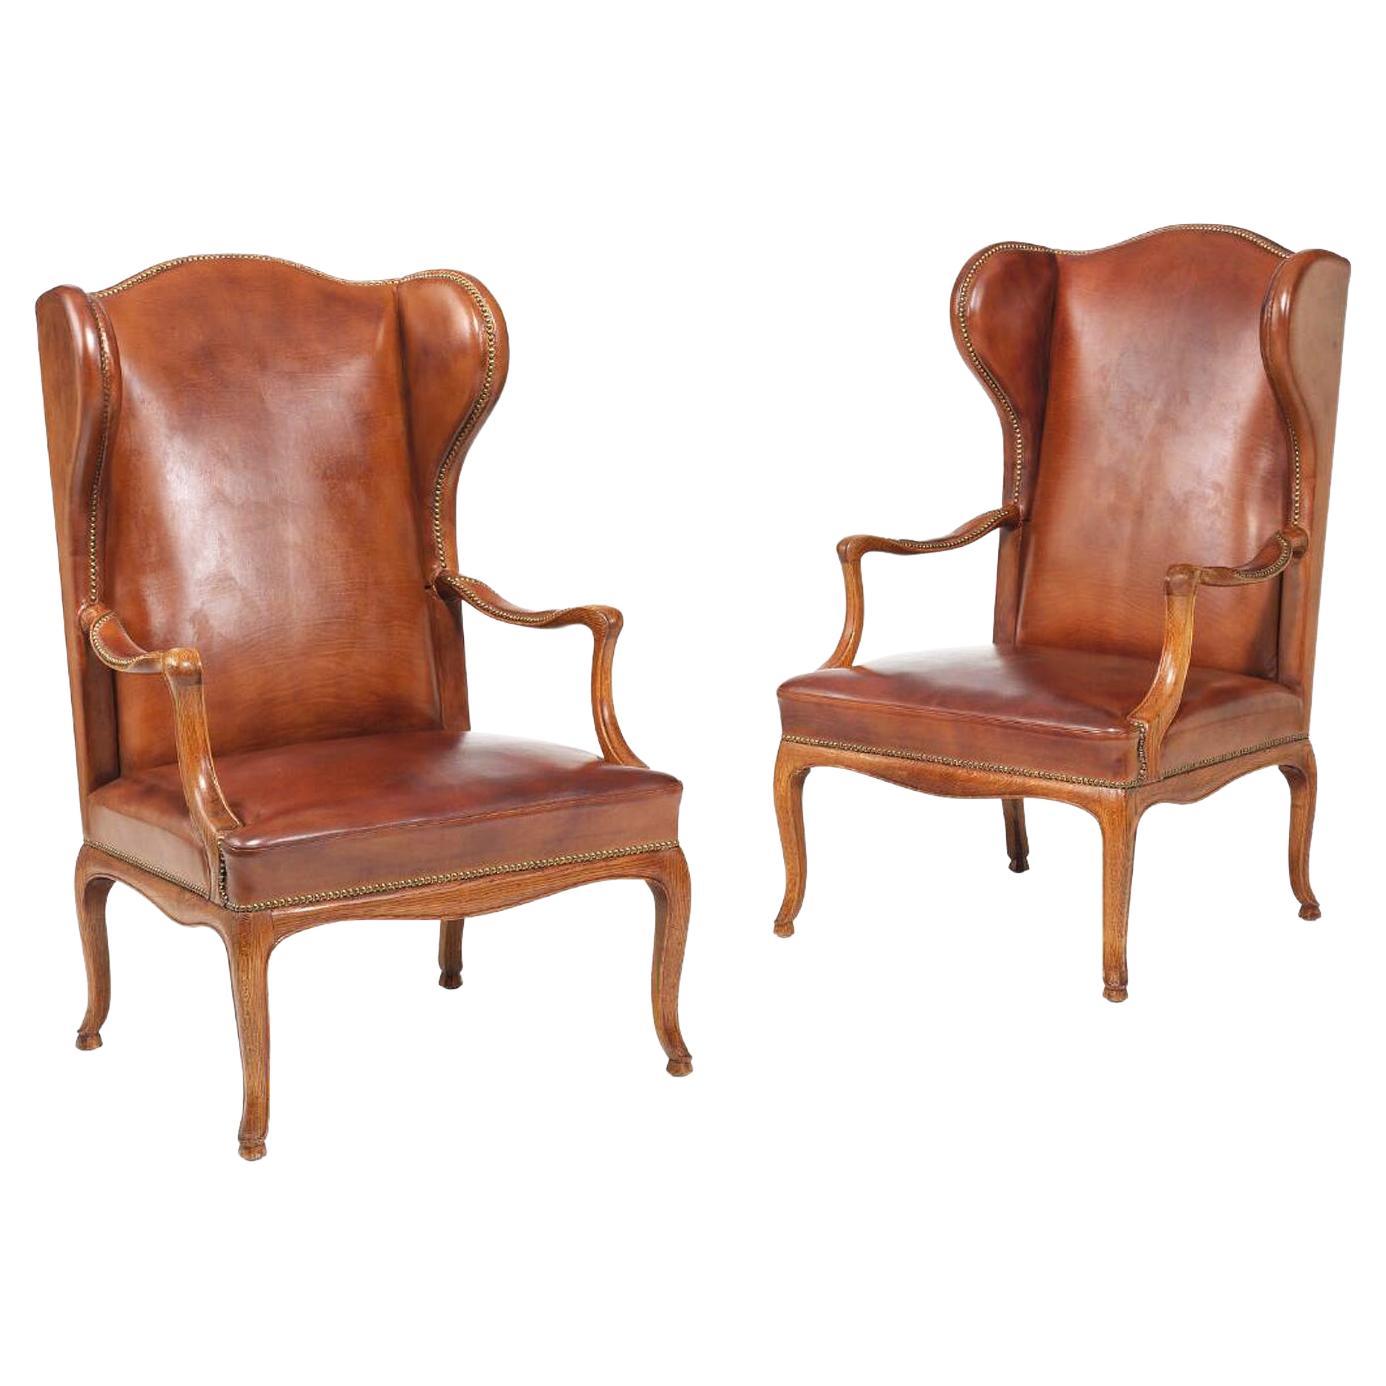 Rare Pair of Leather Bergere Chairs by Frits Henningsen, 1950s For Sale